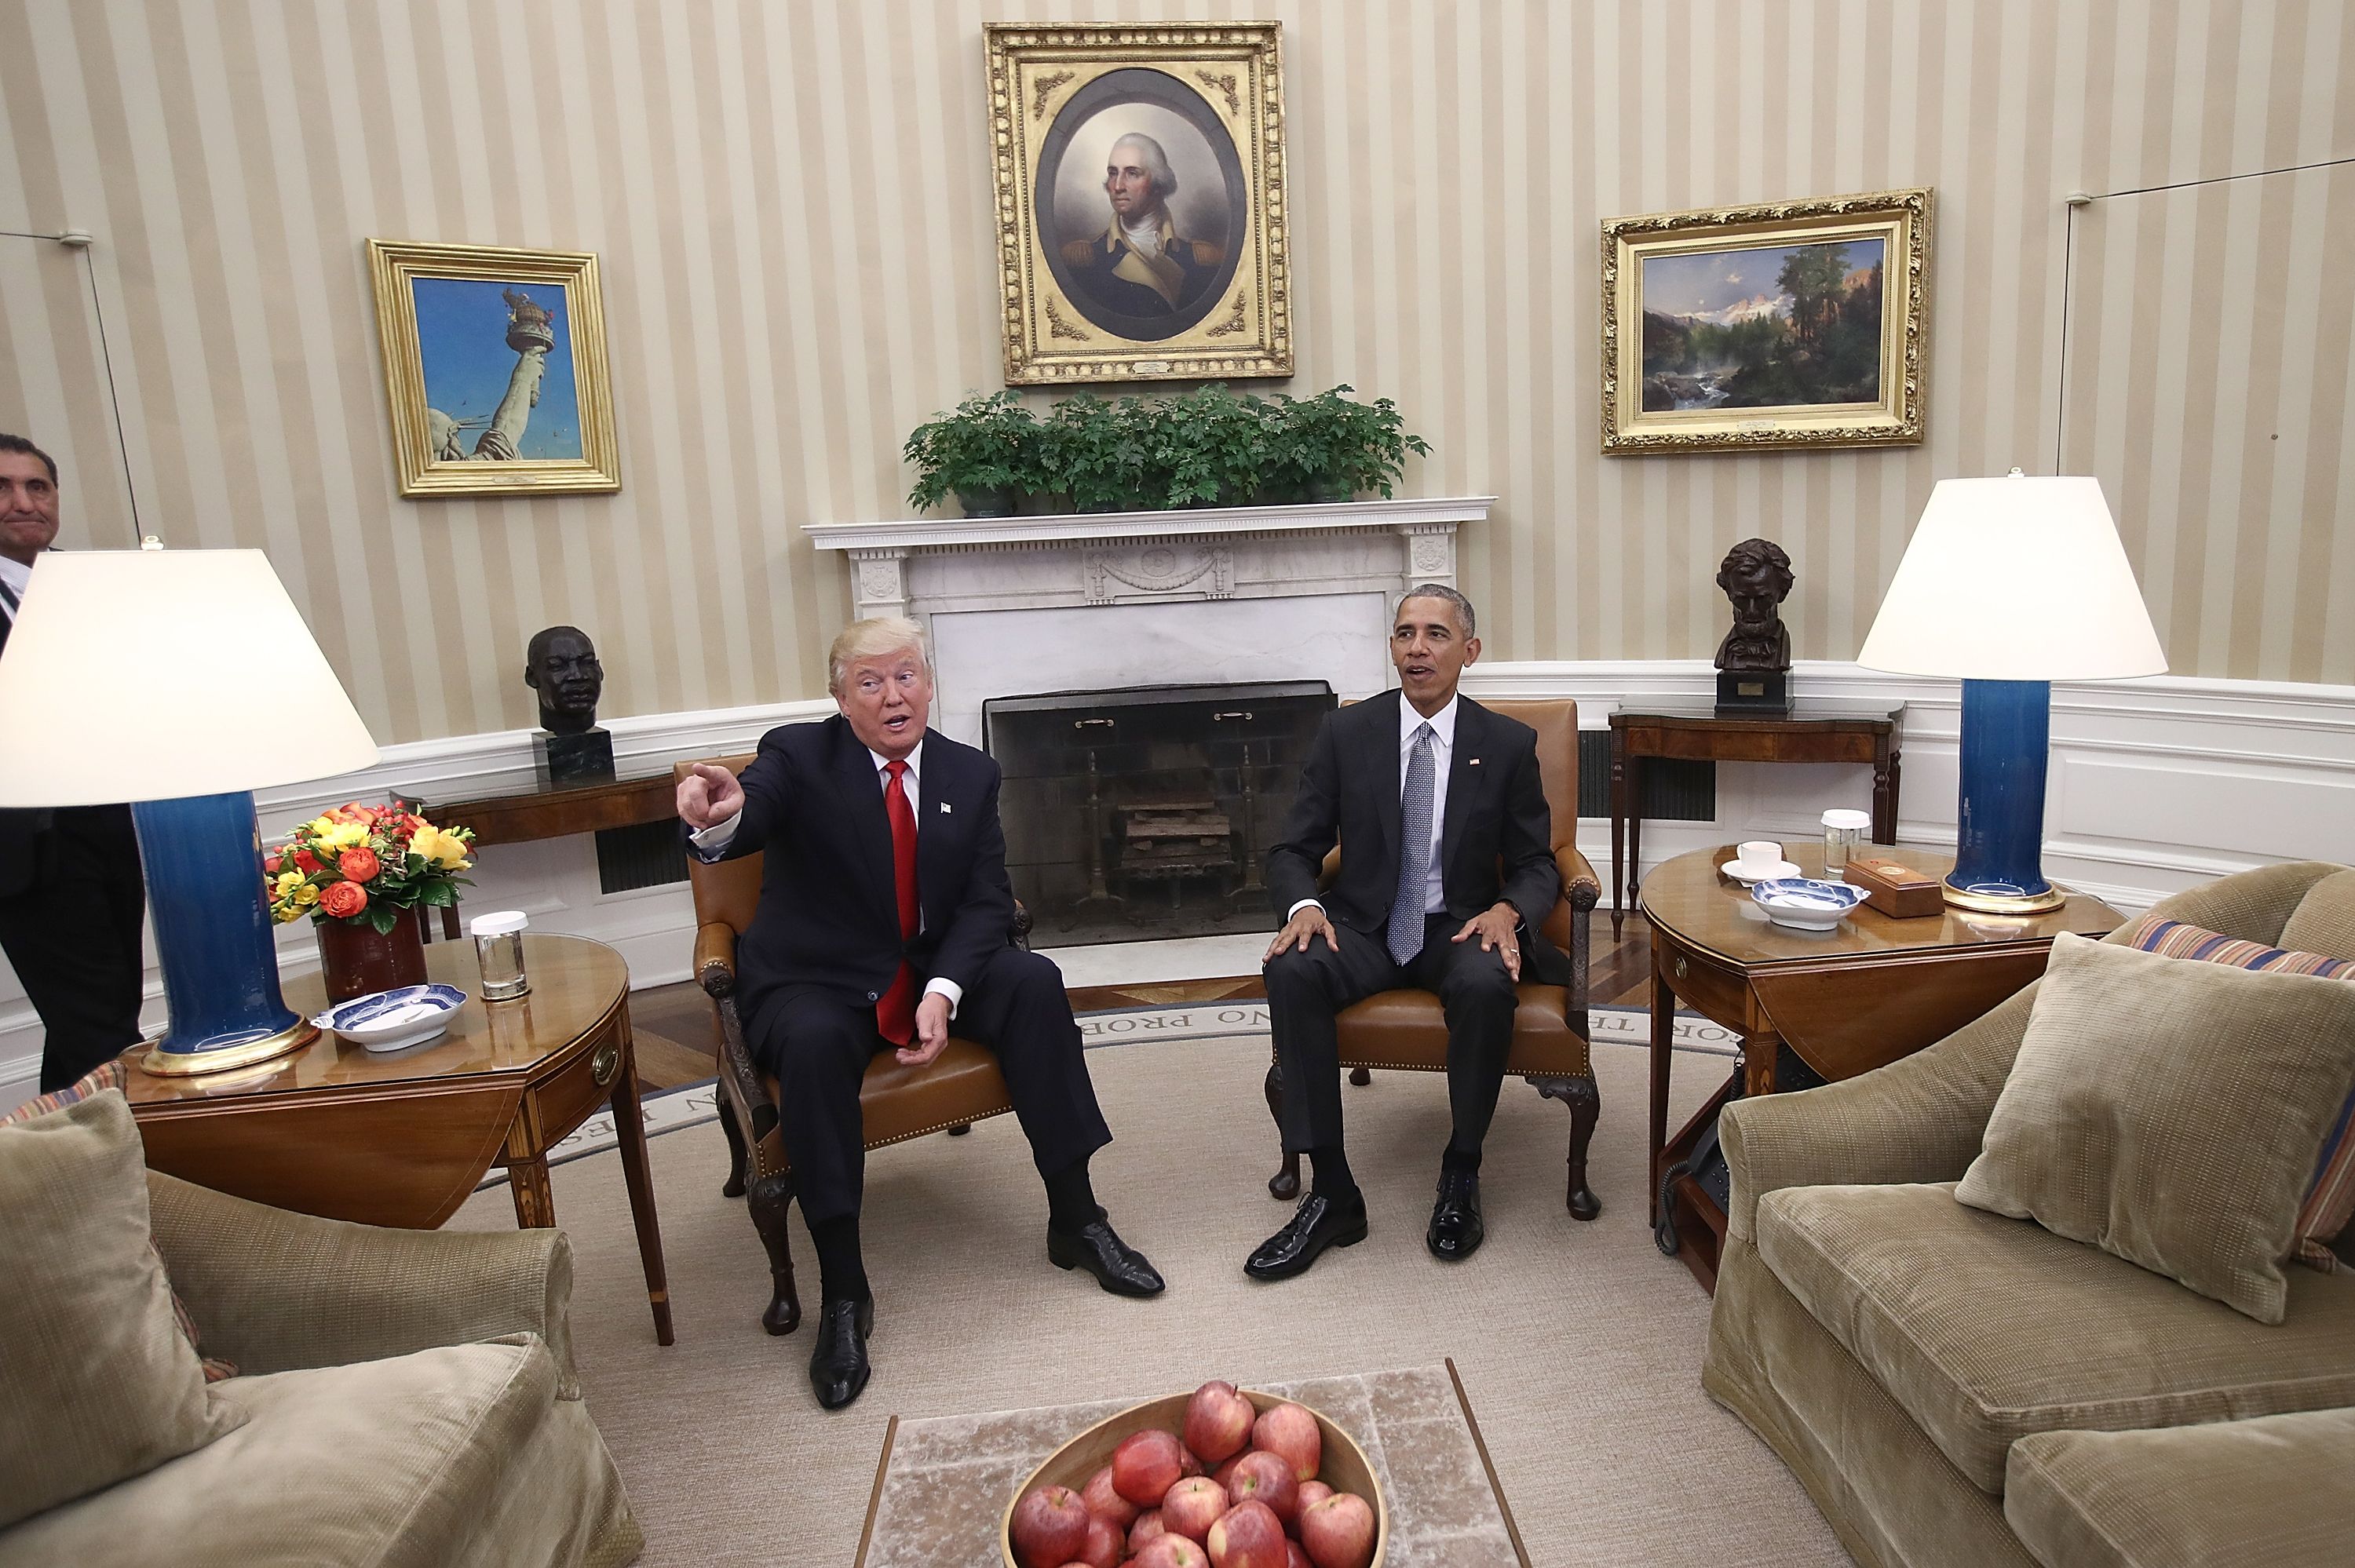 Trump or Obama: Who decorated the Oval Office better?